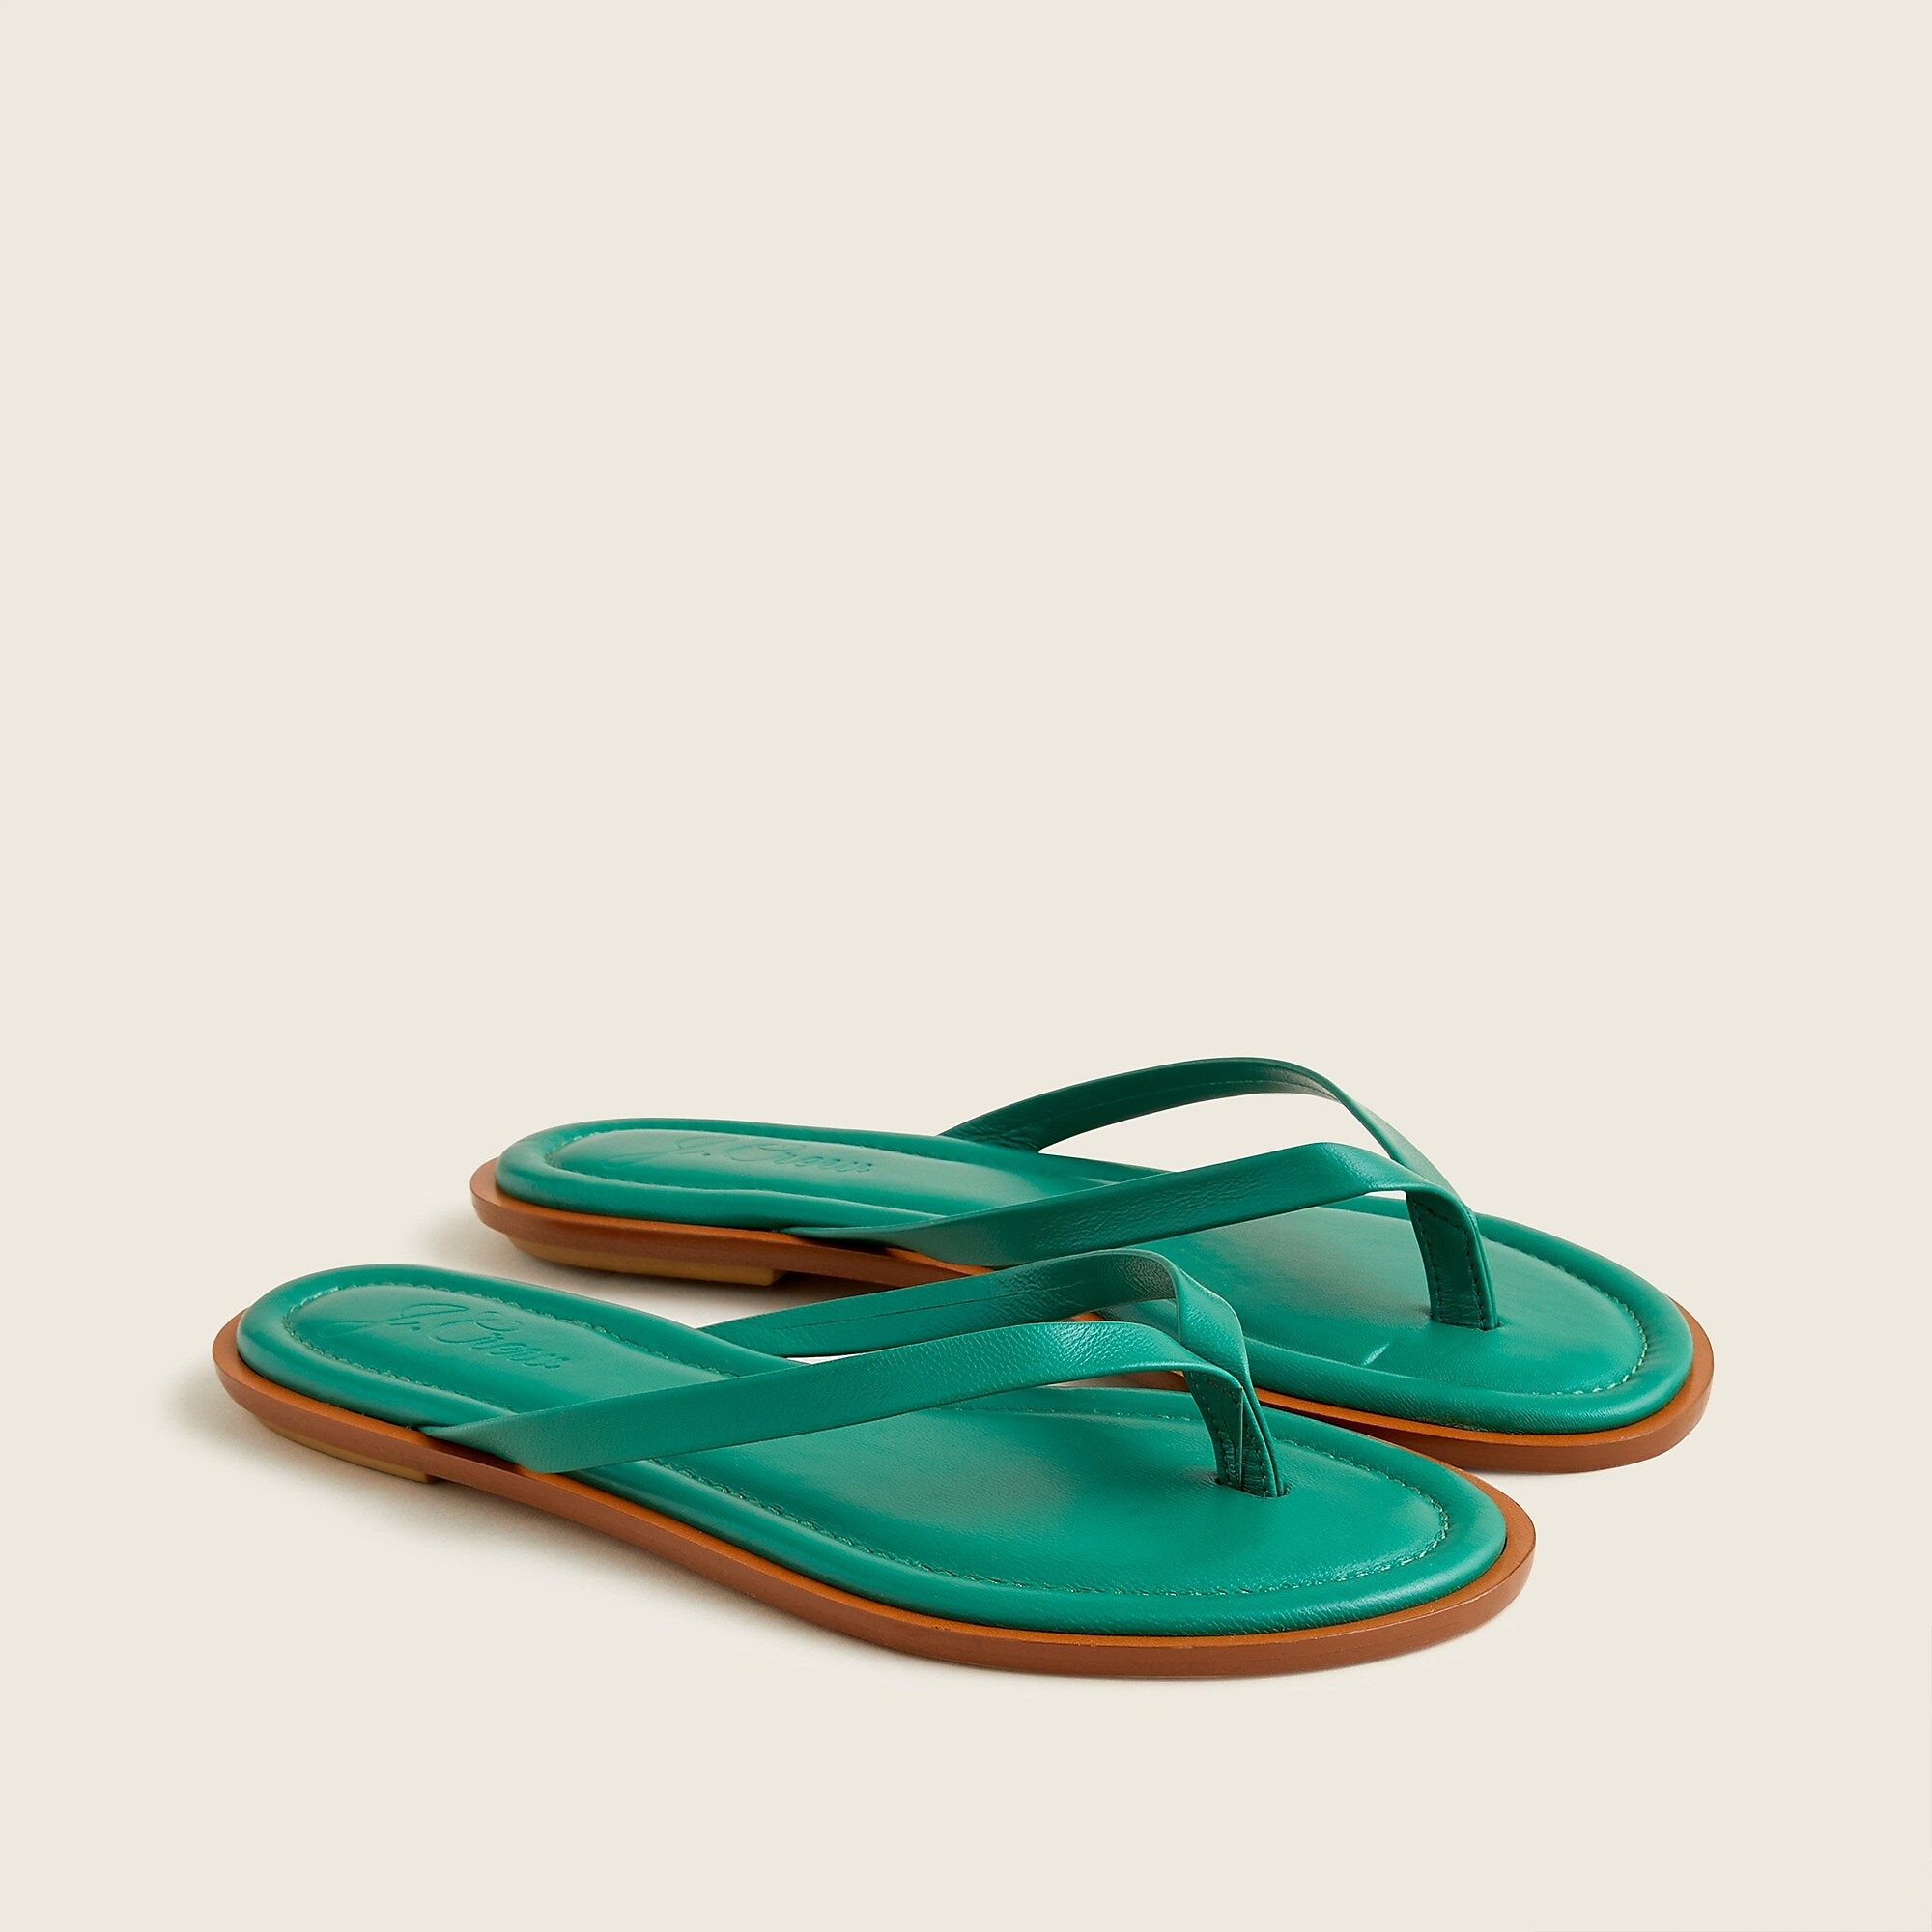 Sorrento thong sandals in leather | J.Crew US